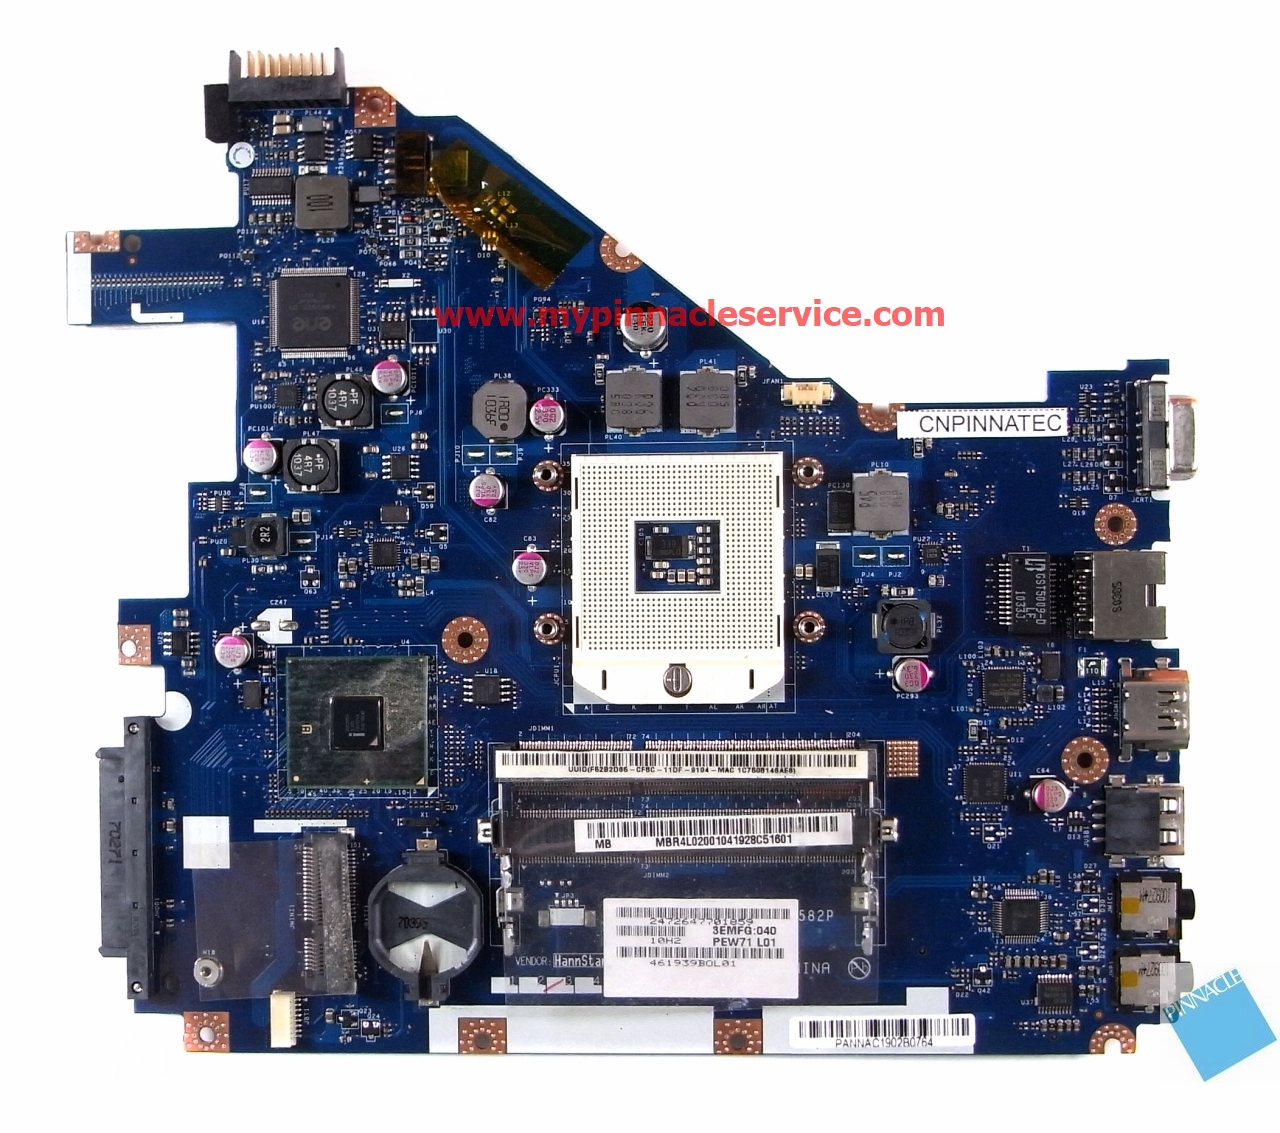 mbr4l02001-with-heatsink-and-i3-cpu-motherboard-for-acer-aspire-5742-la-6582p-instead-of-5552-la-6552p-mbr4602001-rimg0003.jpg